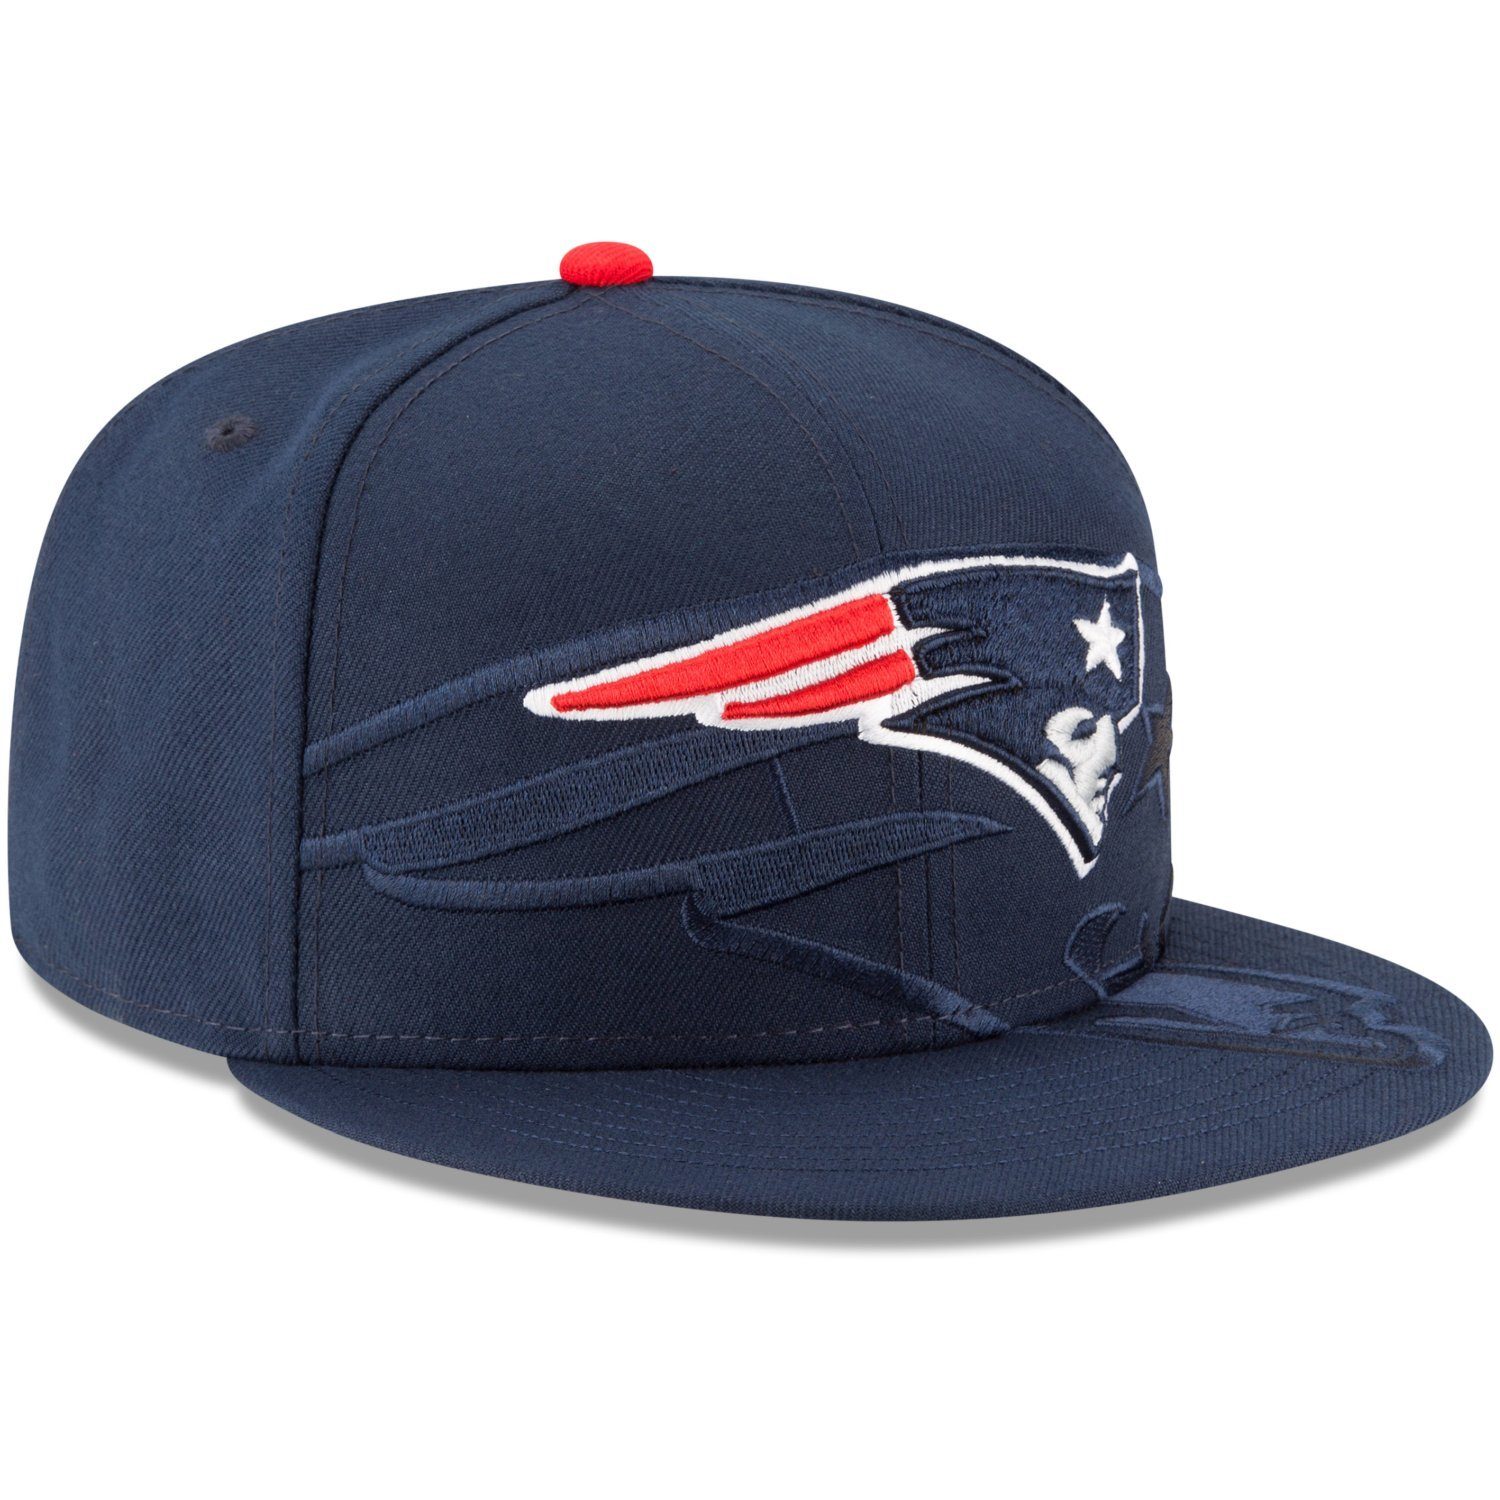 New Fitted NFL Era SPILL Cap Teams New 59Fifty Patriots England Logo